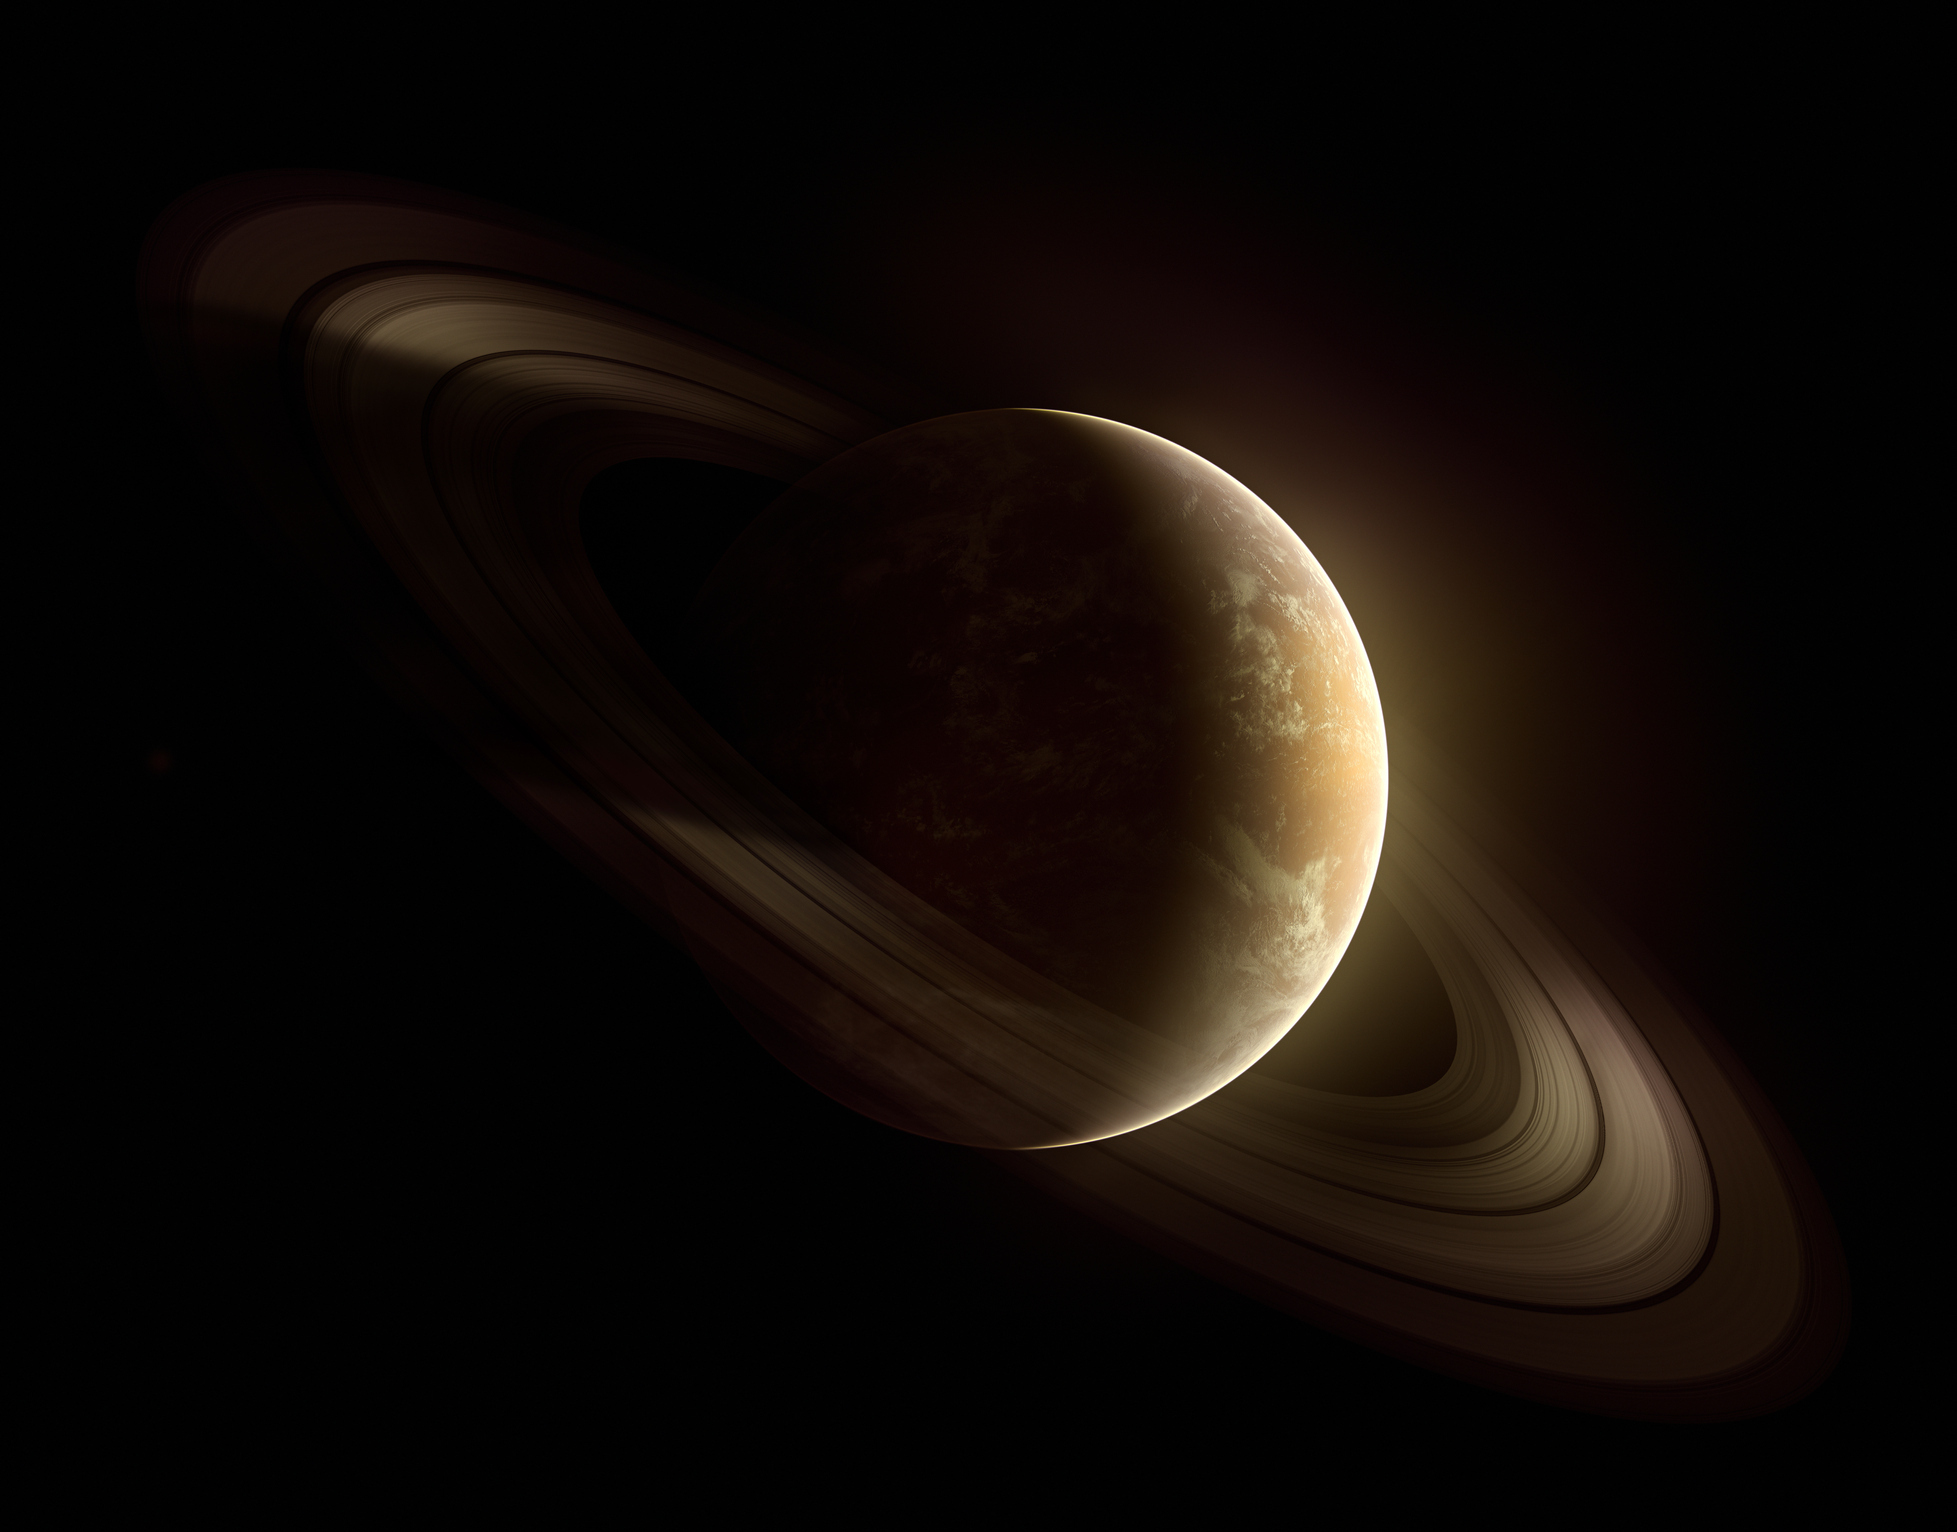 Saturn In the News